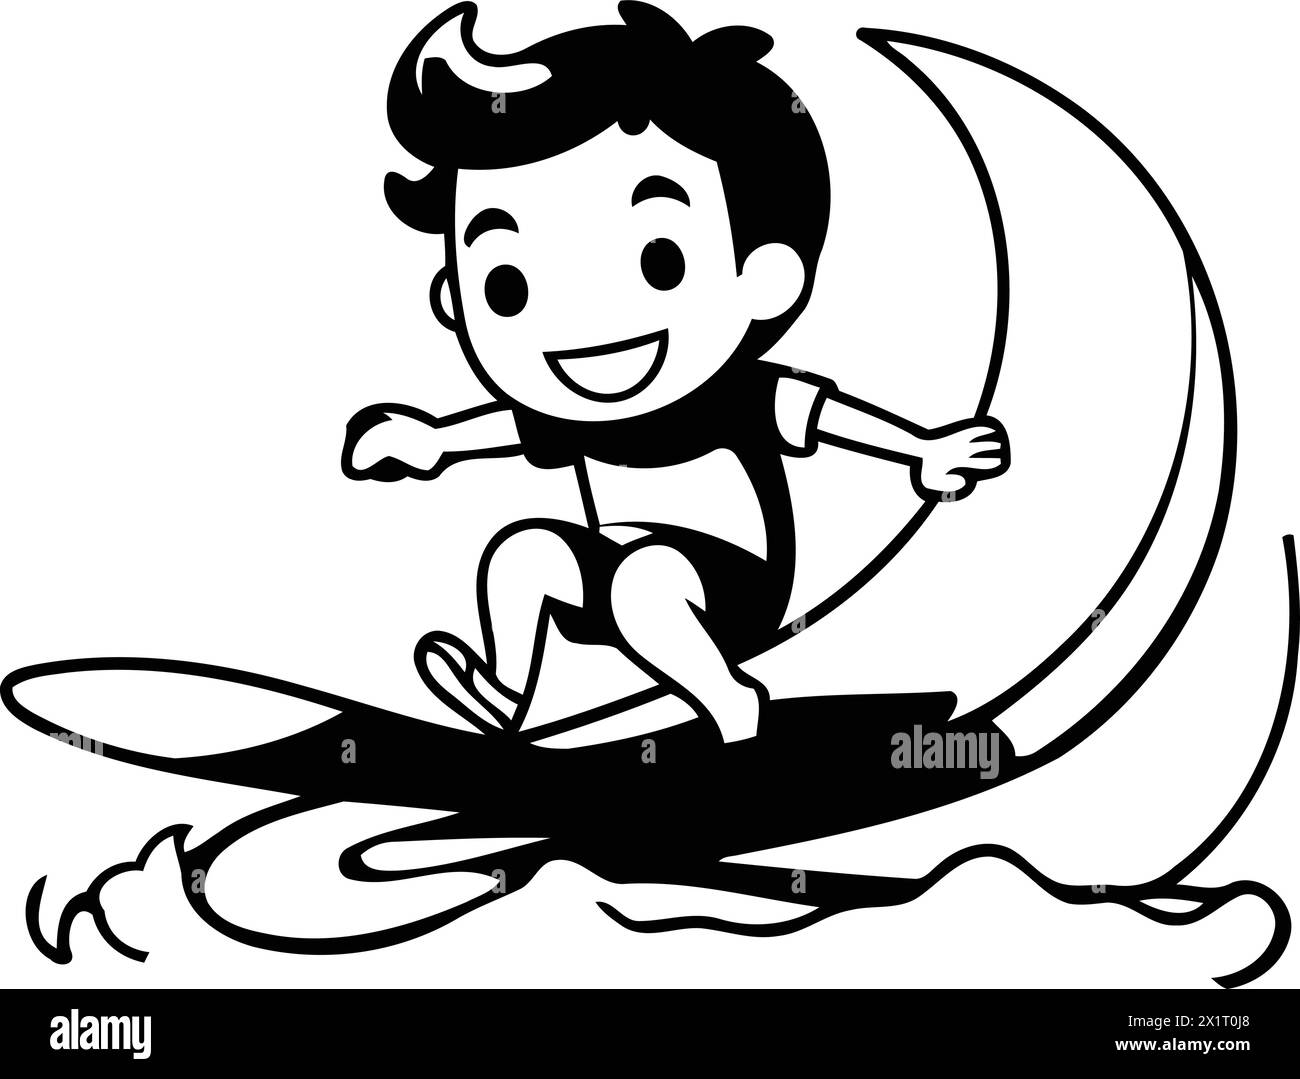 Surfer boy riding a wave. Vector illustration isolated on white background. Stock Vector